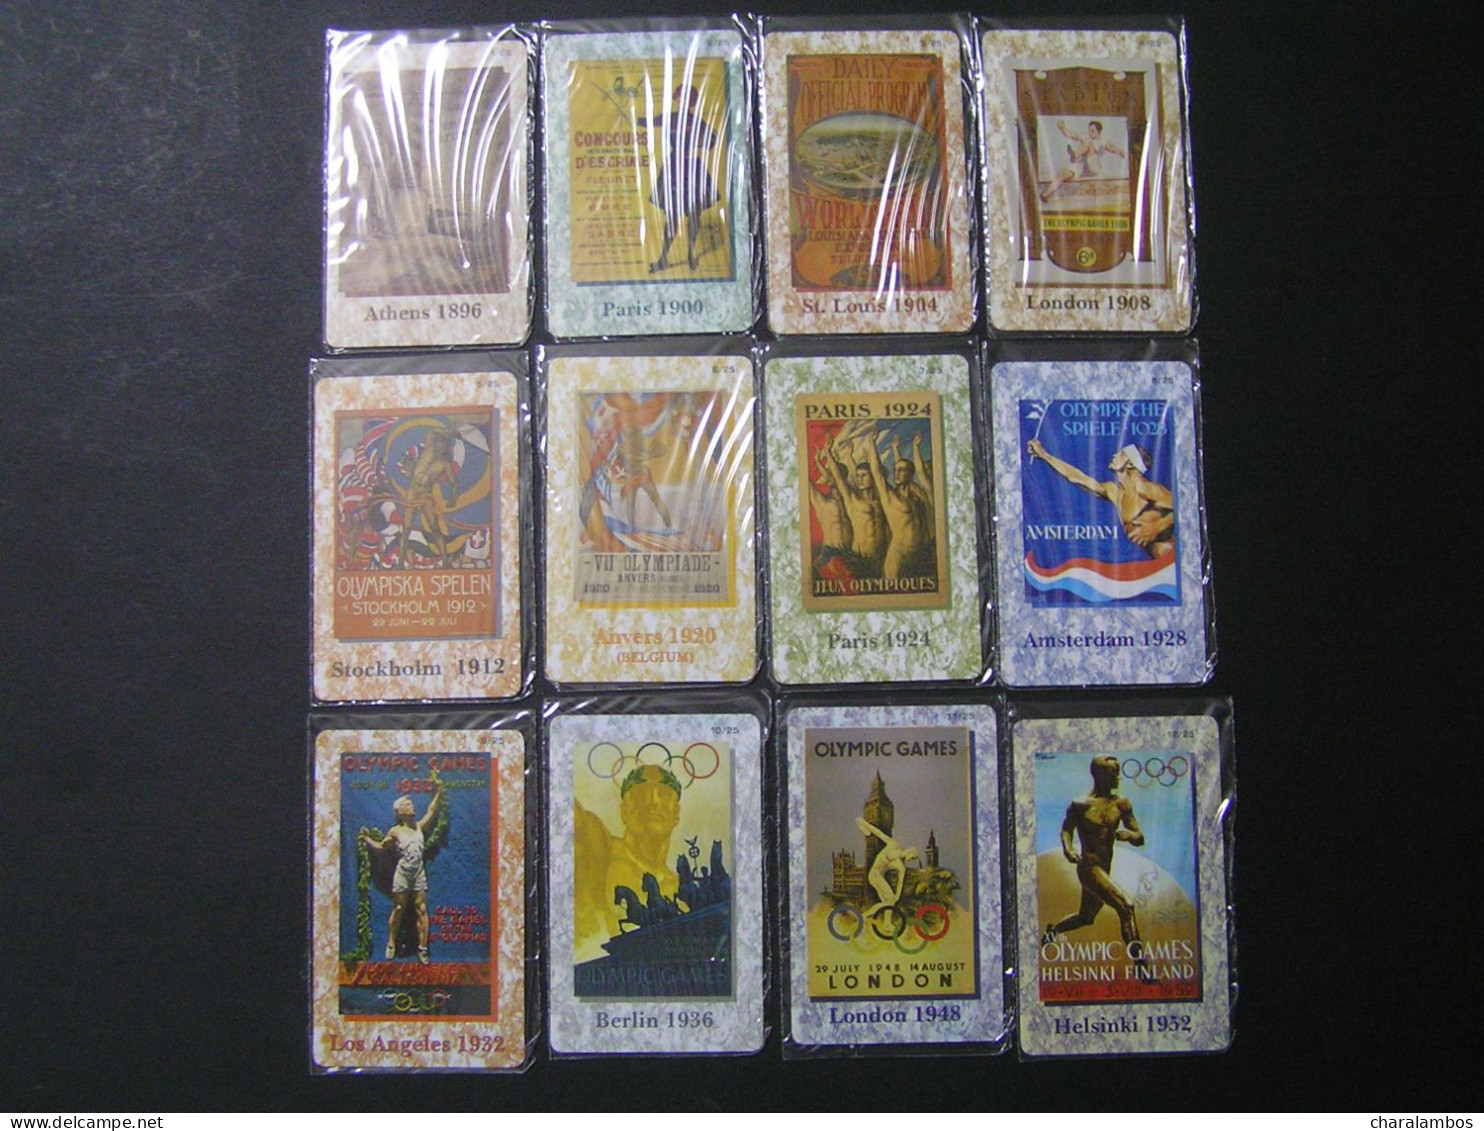 GREECE OLYMPIADS 1896-2004 25 Collectors Telephone Cards DVD ANCIENT OLYMPIA Birthplace Of The Olympic Games Folder Mind - Juegos Olímpicos